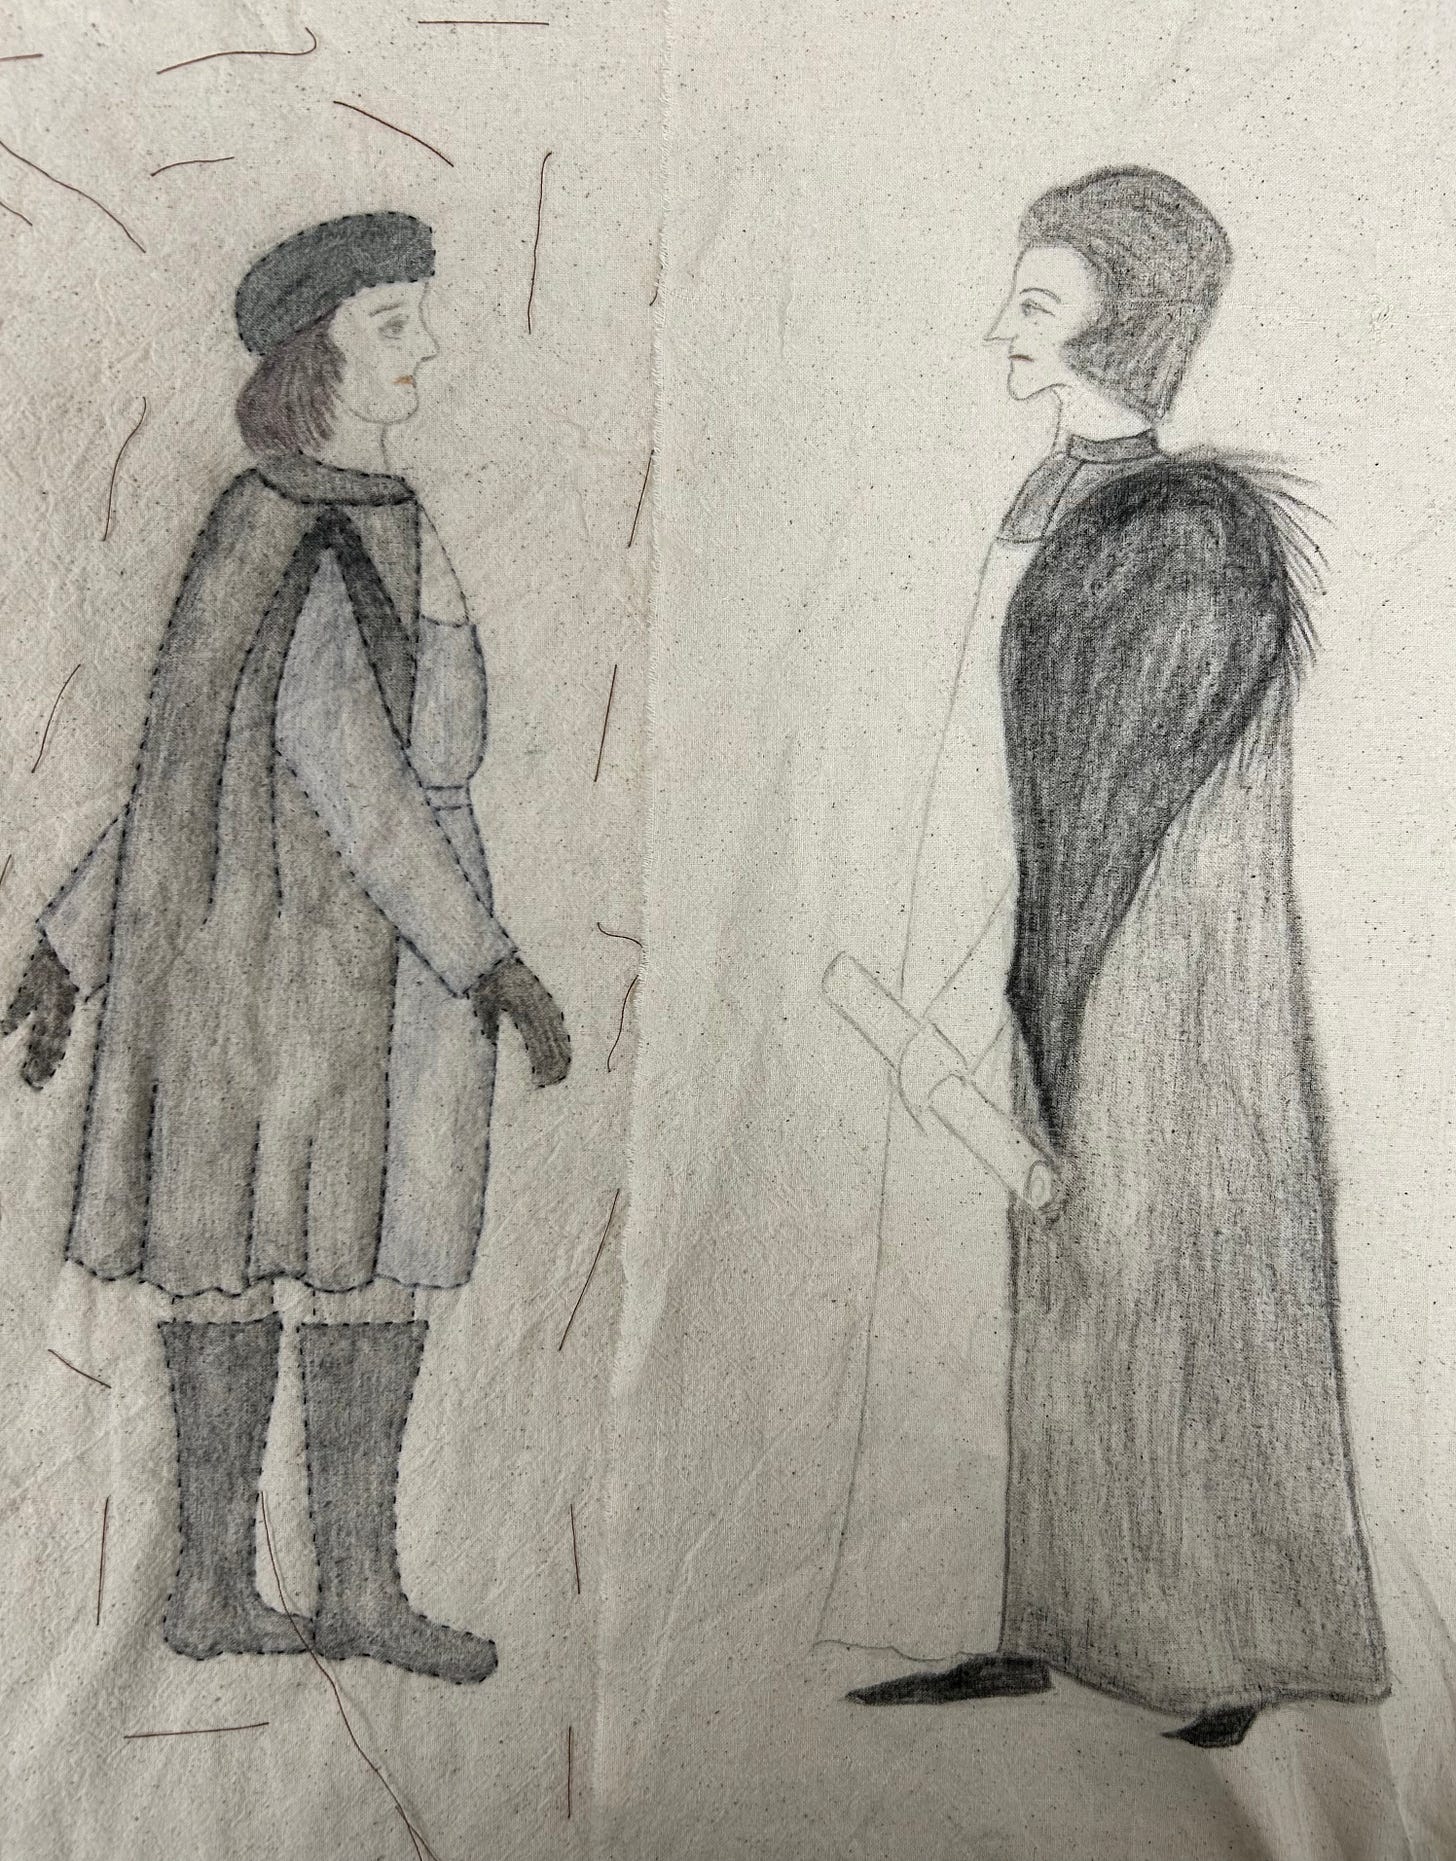 Two men stitched and painted face each other, one representing Thomas Cromwell, one representing Stephen Gardiner